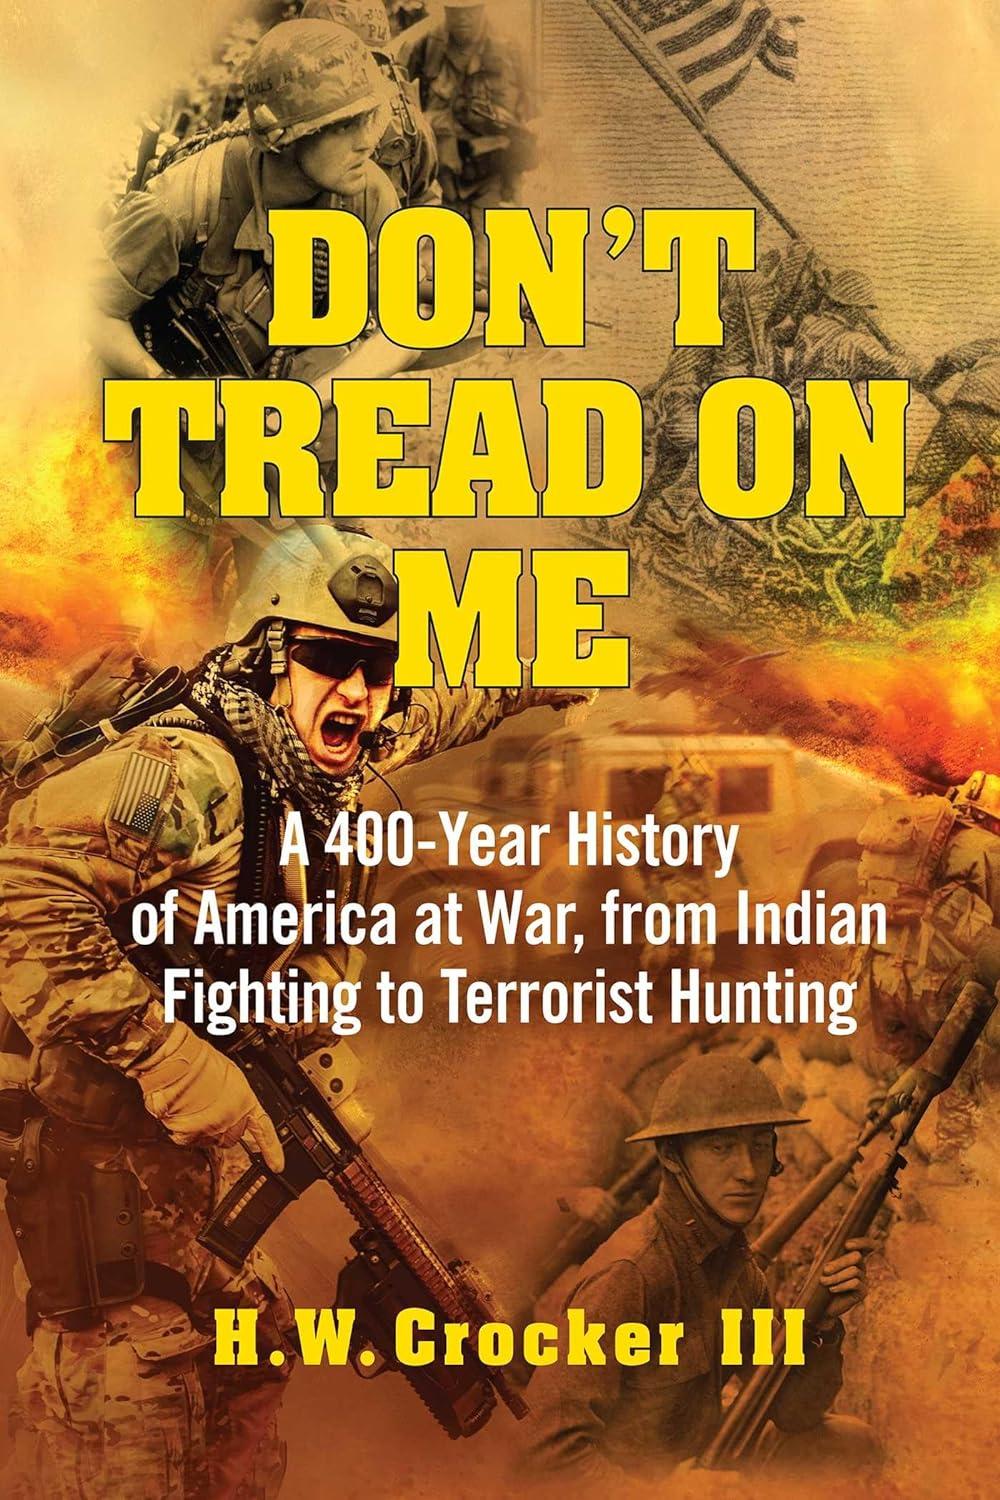 "Don't Tread on Me: A 400-Year History of America at War, from Indian Fighting to Terrorist Hunting," by H.W. Crocker III.